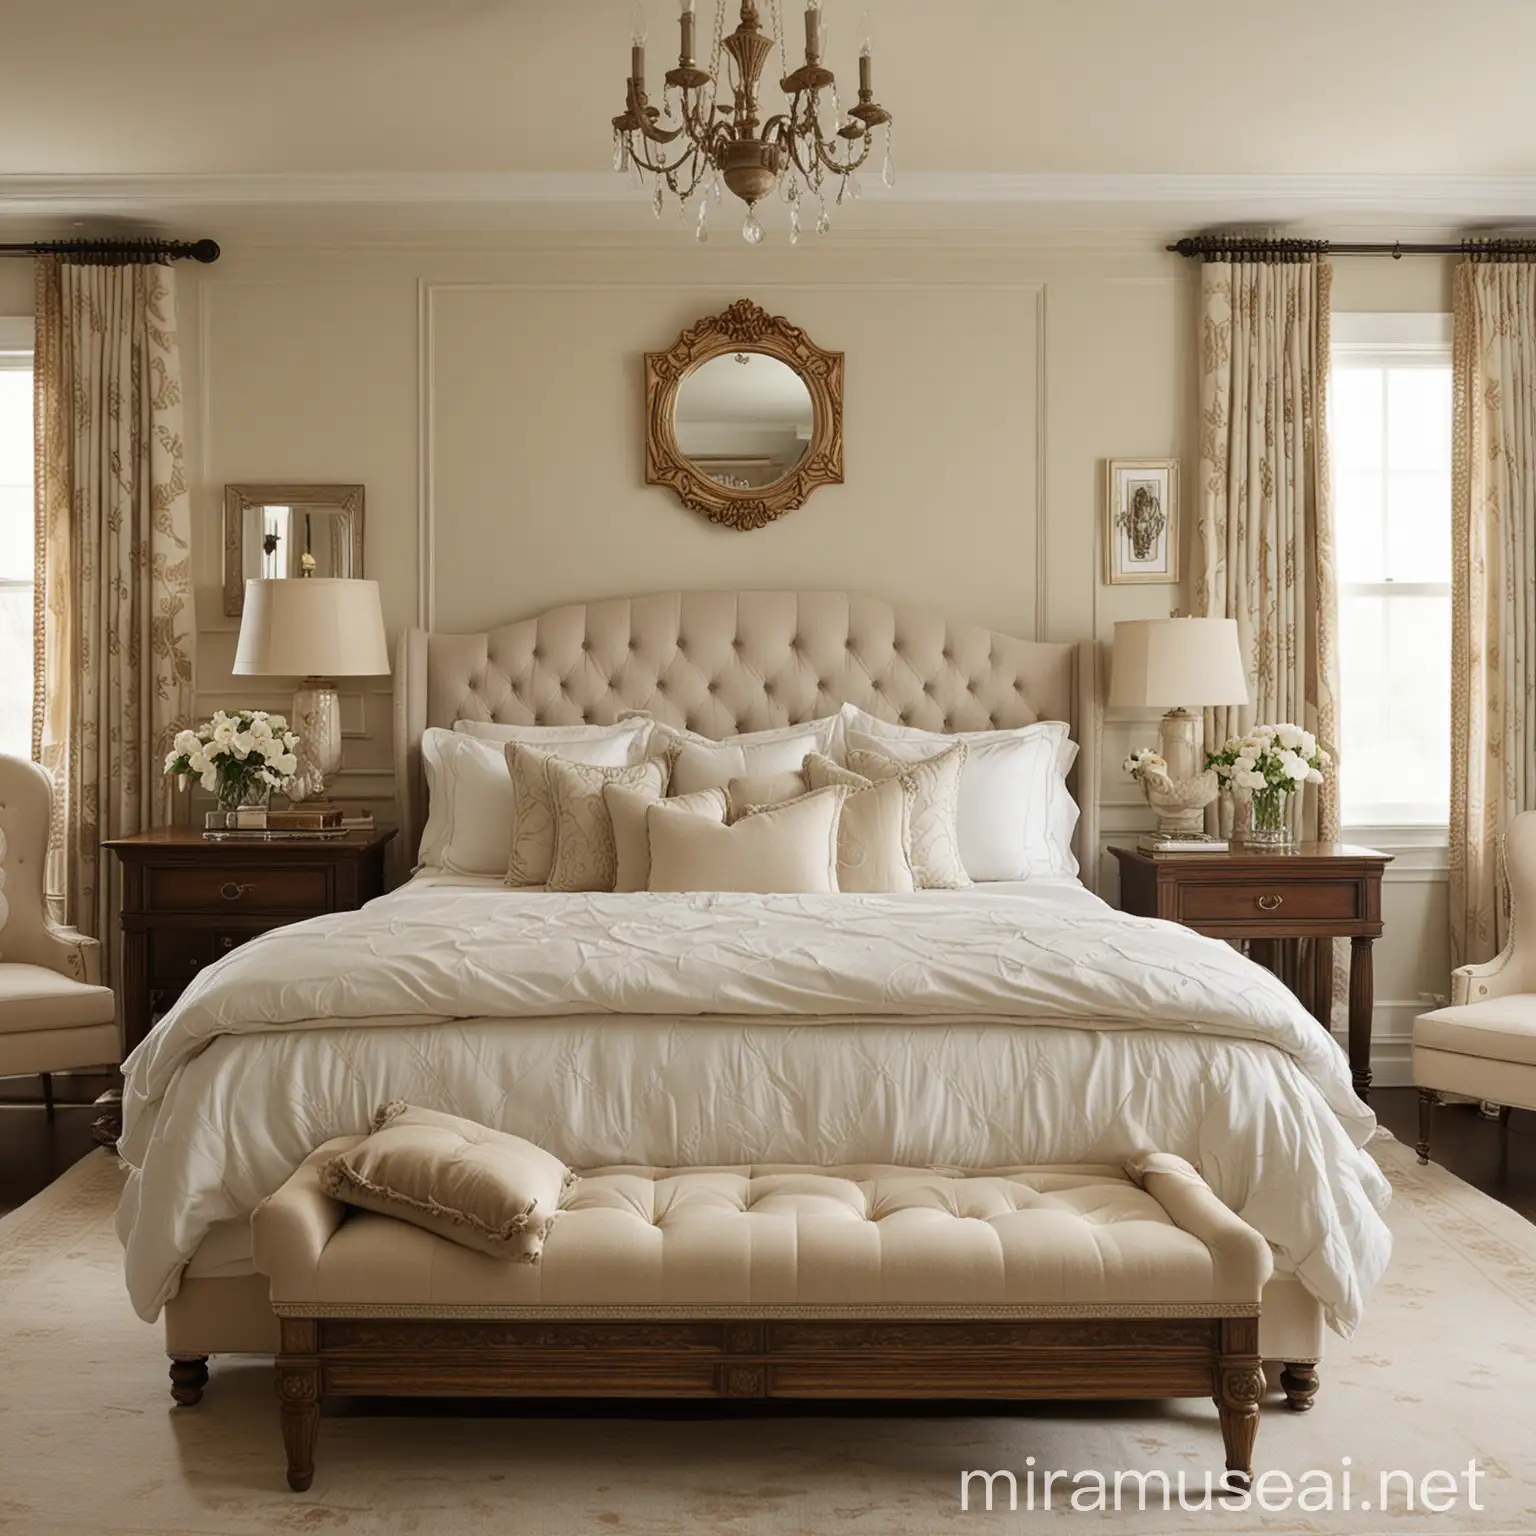 Timeless Classic Bedroom Design with Elegant Neutral Palette and Rich Wood Furniture